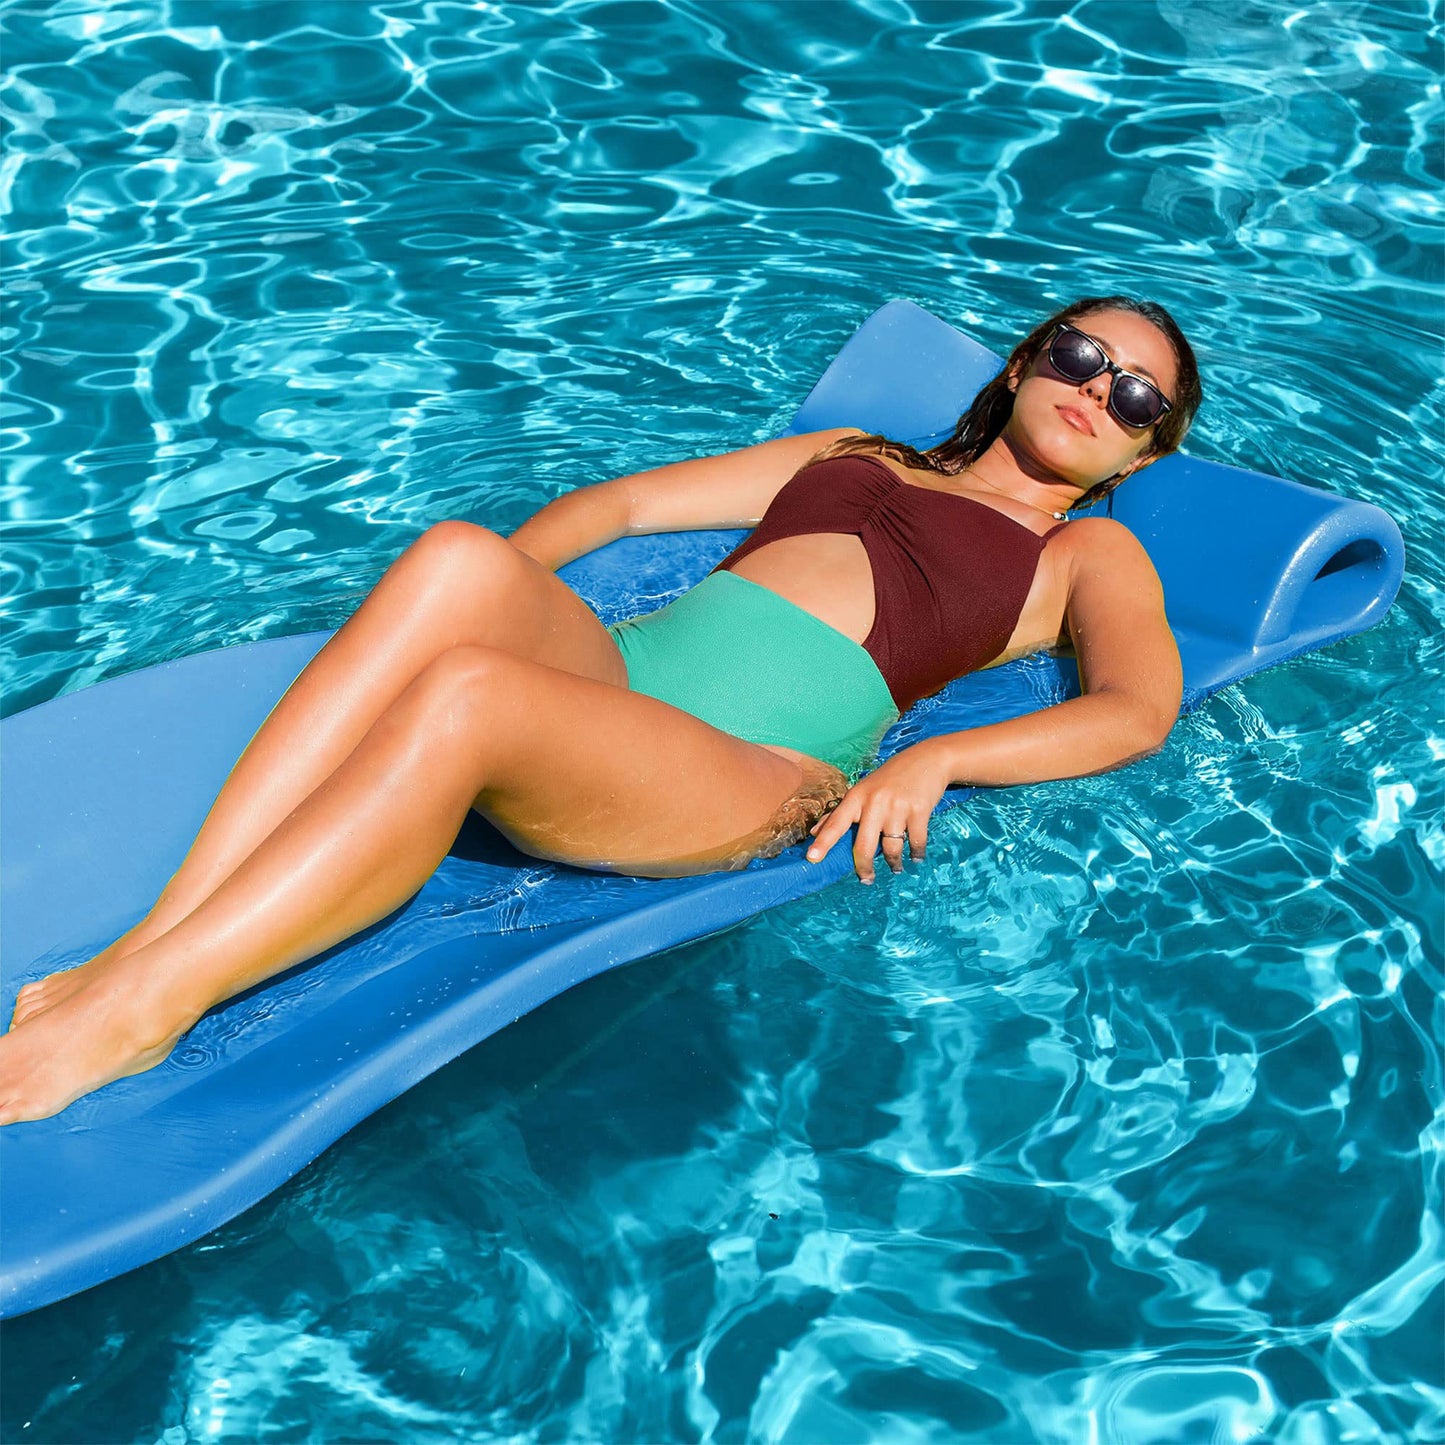 TRC Recreation Splash 1.25 Inch Thick Foam Swimming Pool Float Mat Large Adult Lounger with Built-in Roll Pillow, Bahama Blue